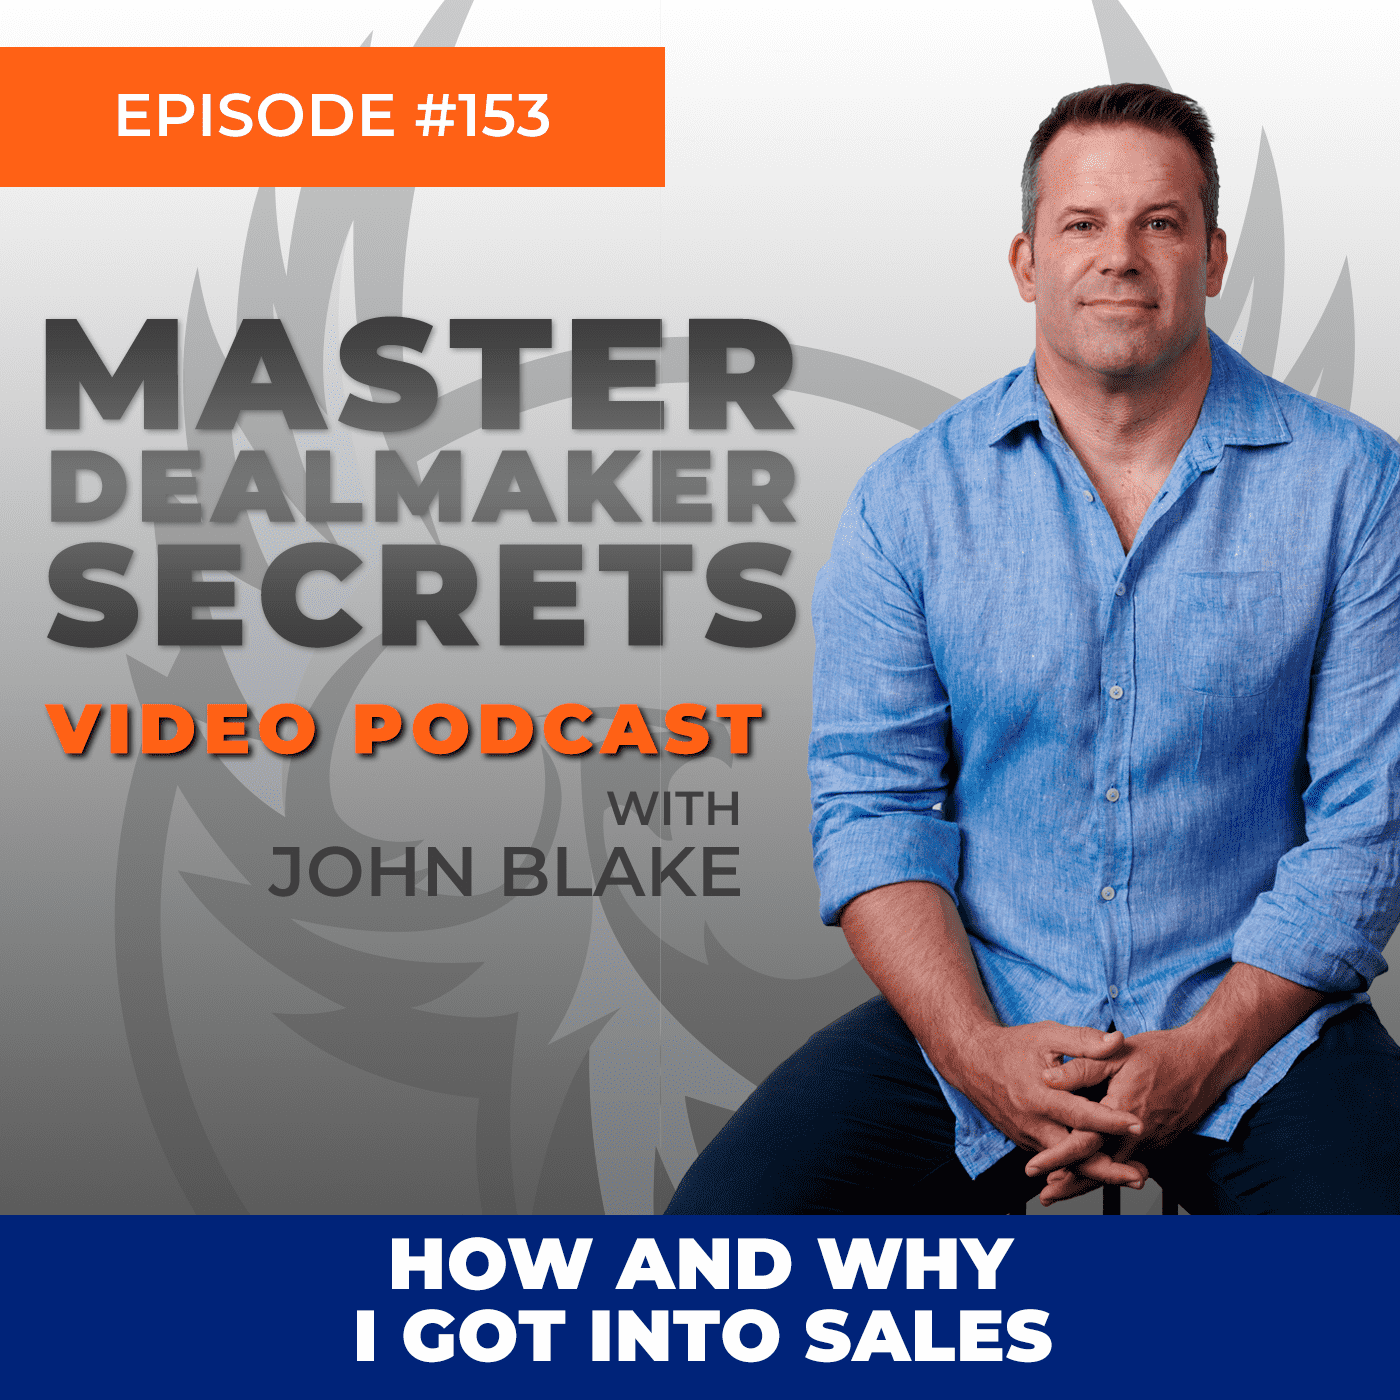 John Blake How and Why I Got Into Sales